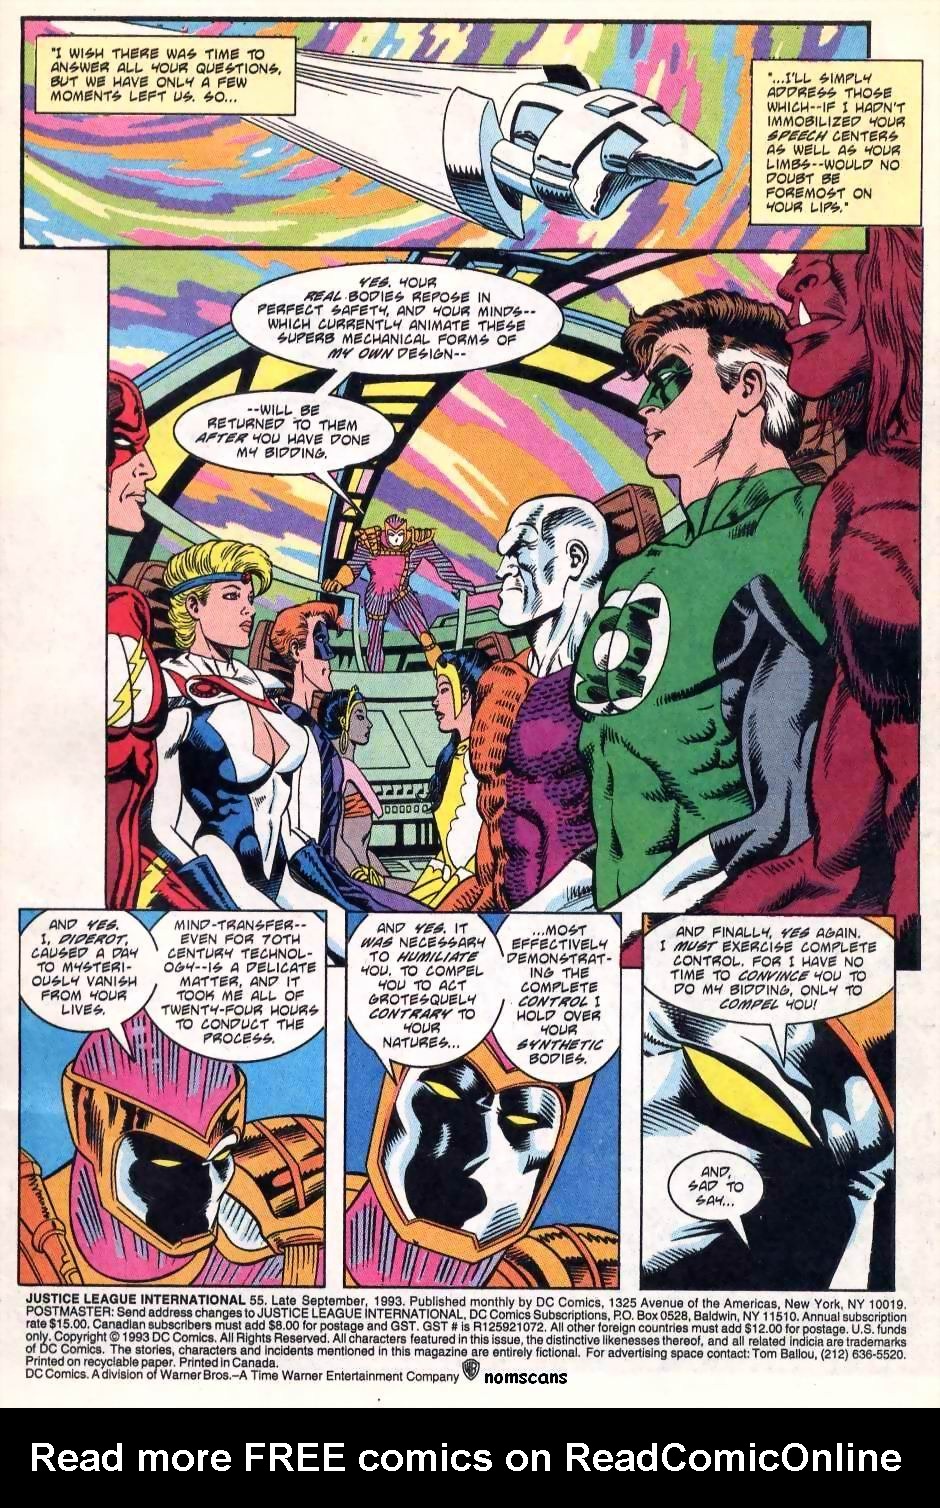 Justice League International (1993) 55 Page 1